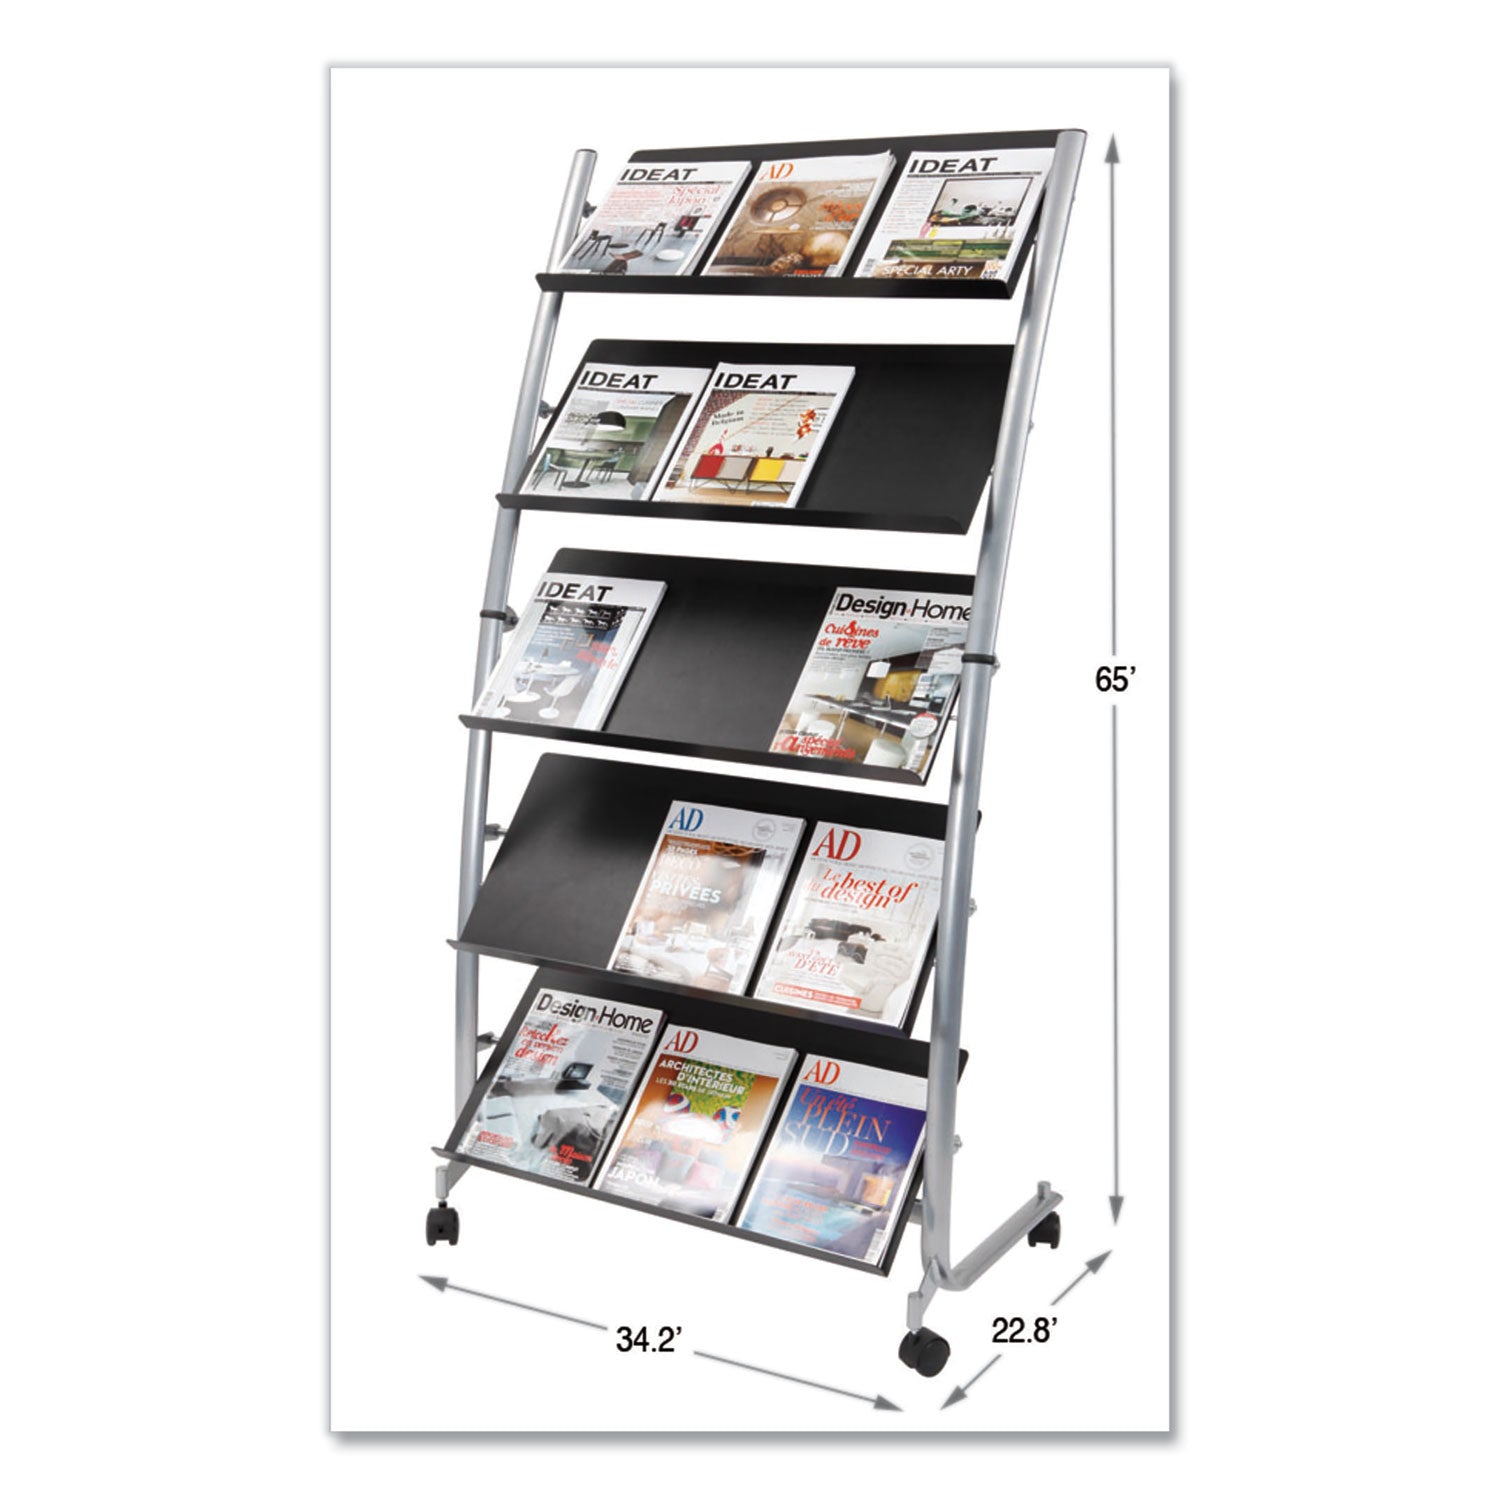 Alba Large Mobile Literature Display - 350 x Sheet - 5 Compartment(s) - Compartment Size 12.99" x 28.35" - 65.4" Height x 32.3" Width x 20.1" DepthFloor - Built-in Wheels - Metal, ABS Plastic - 1 Each - 2